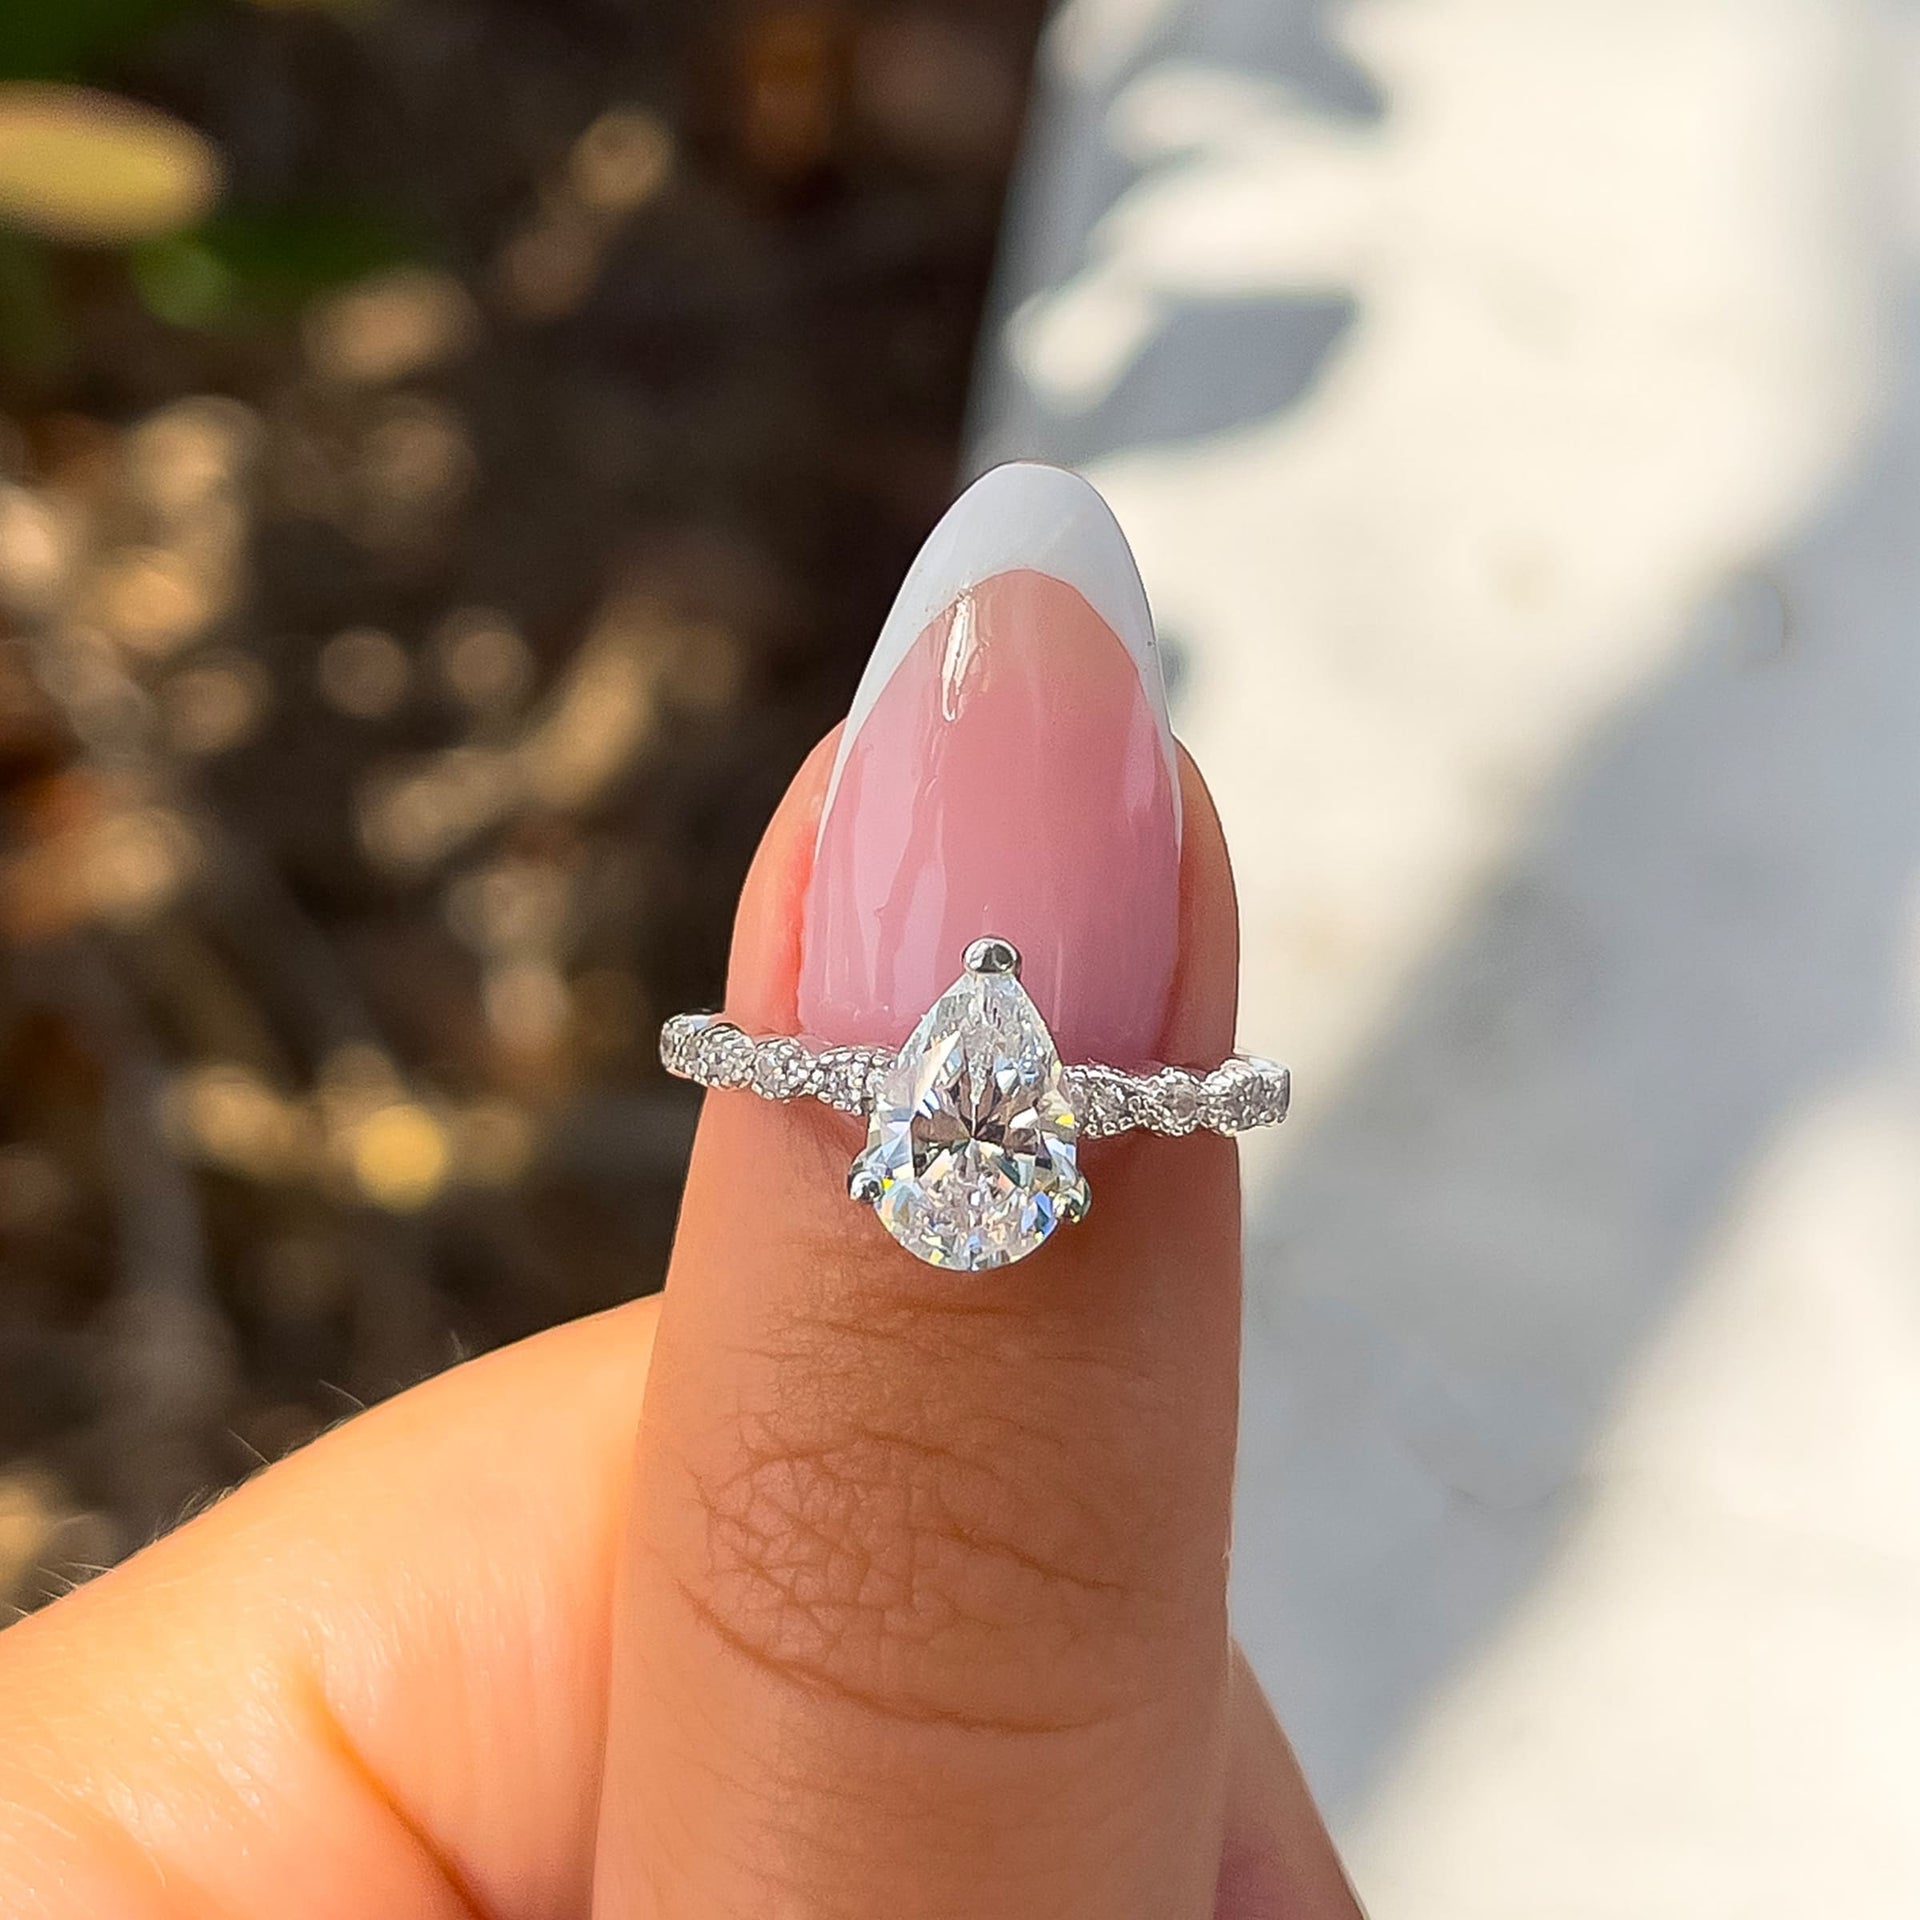 gorgeous vintage style pear cut engagement ring on female hand with french tip nail